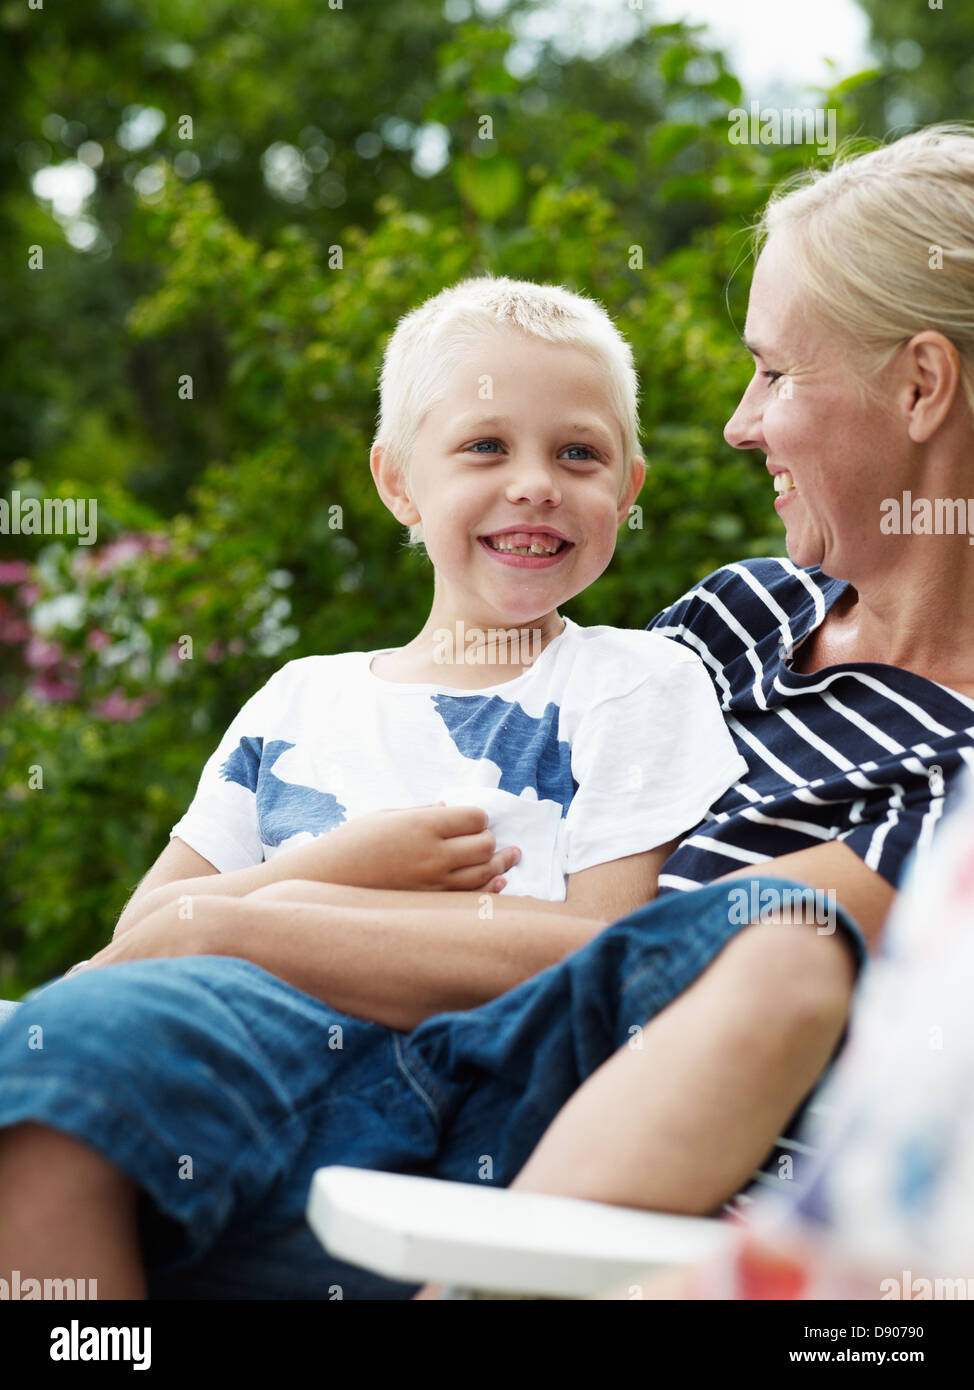 Mother and boy sitting in outdoor chair Stock Photo